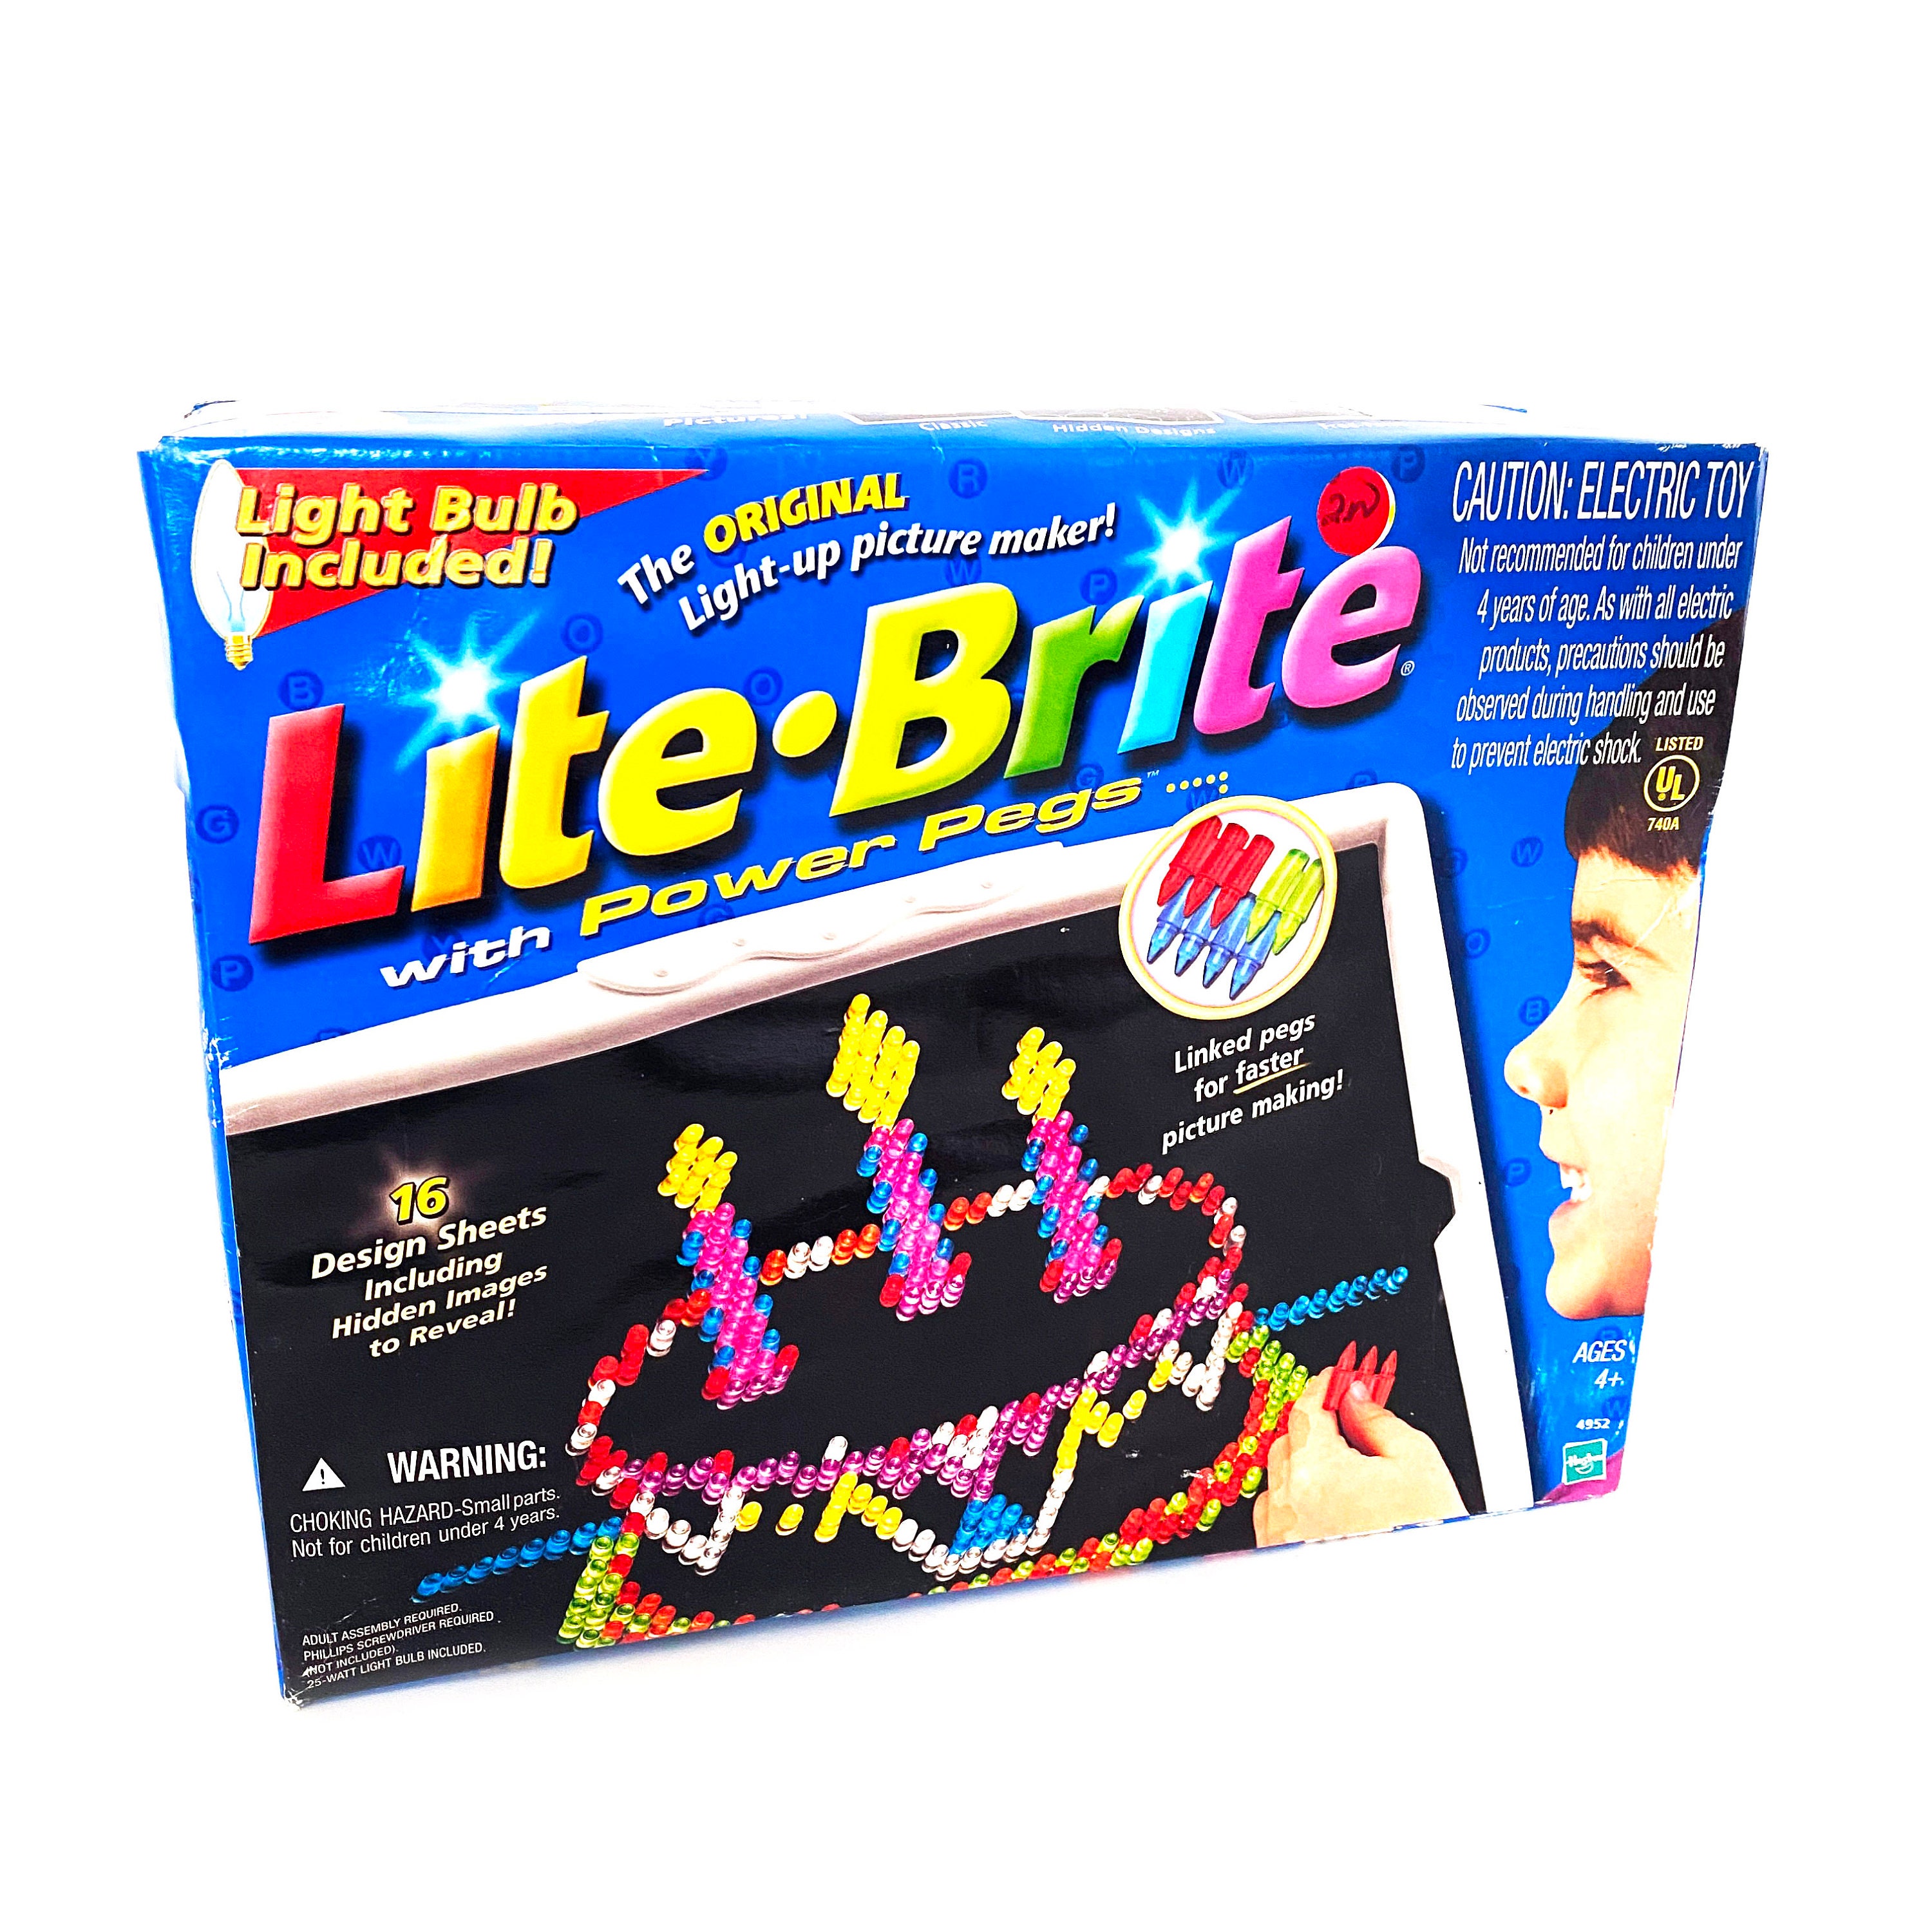 Vintage Hasbro LITE BRITE toy with a lots of Pegs Light Bright, kids fun  toys